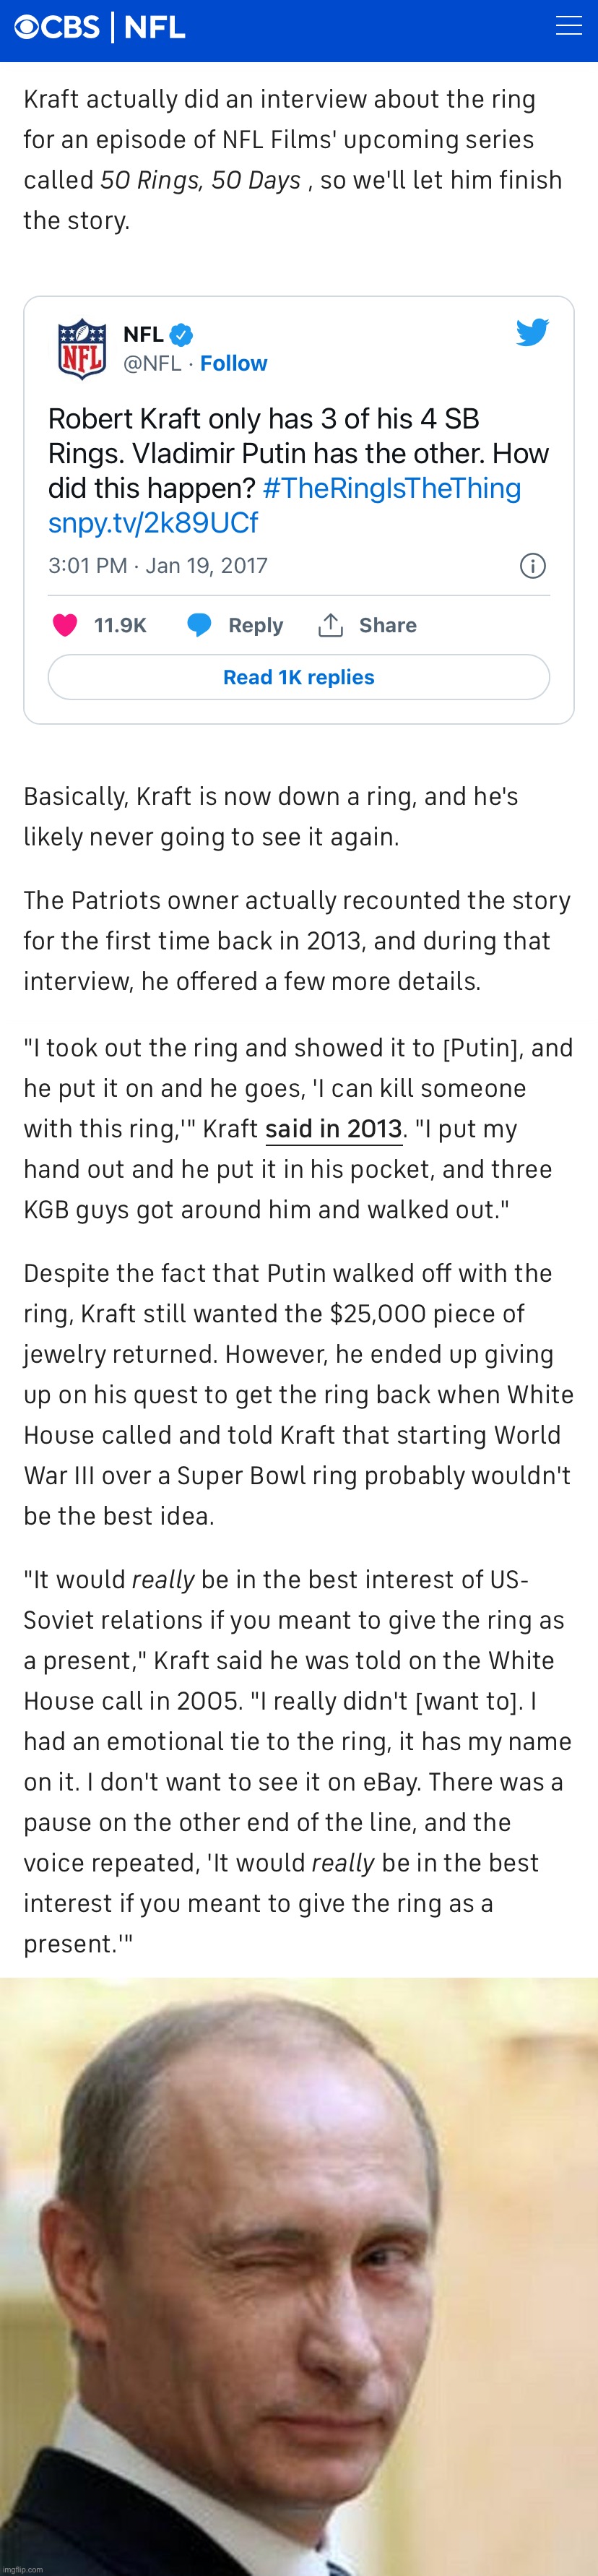 Russian President Vladimir Putin denies stealing £16,000 diamond-encrusted Super  Bowl ring | The Independent | The Independent